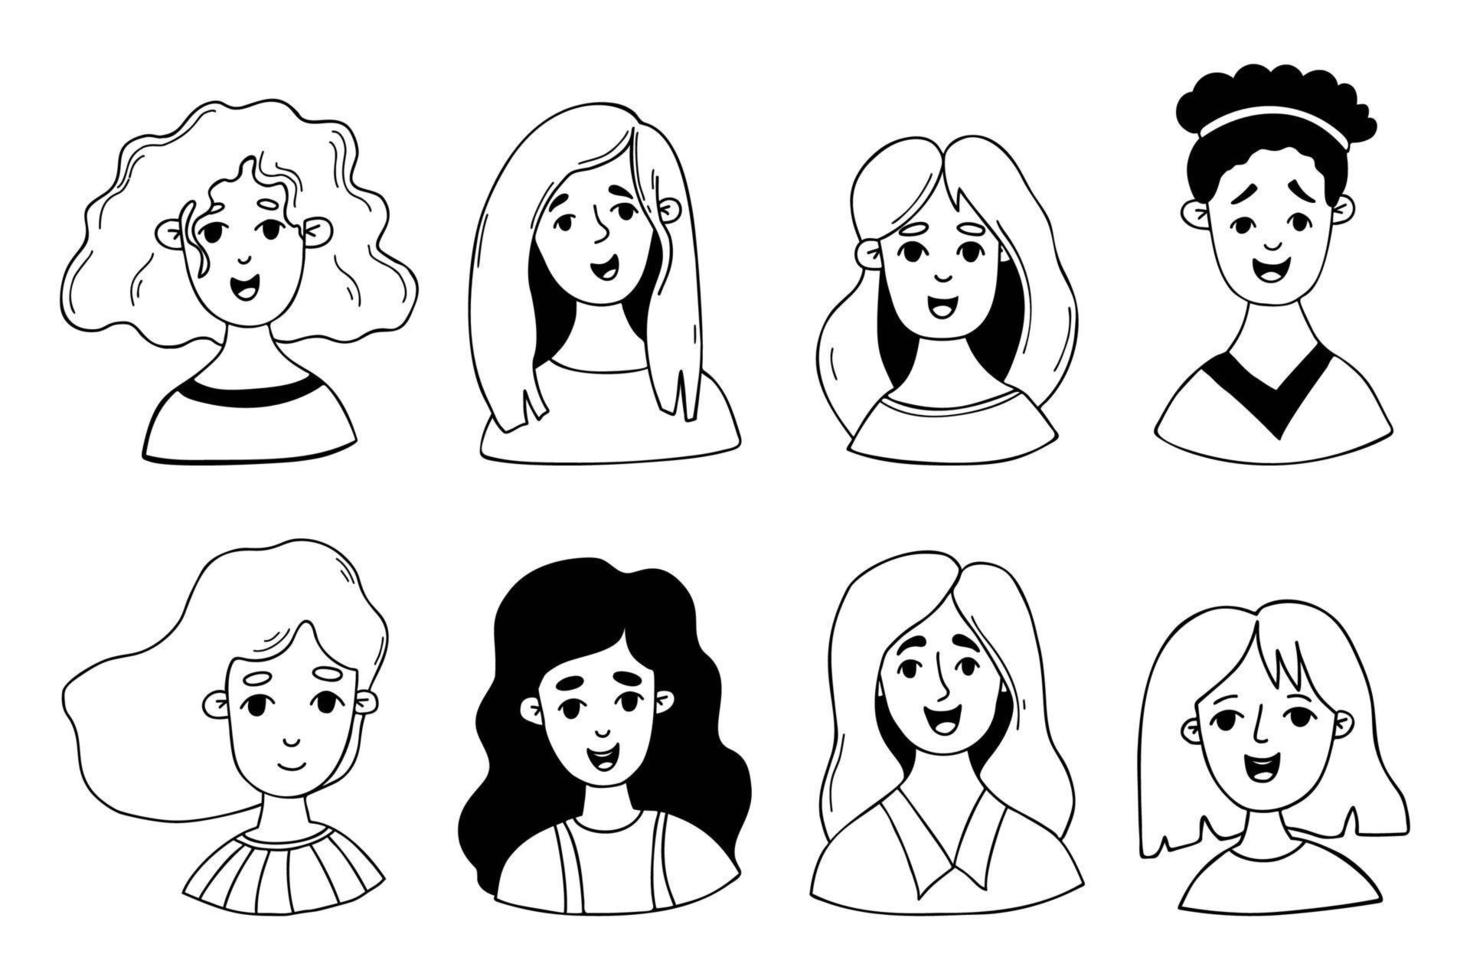 Collection cute female cartoon faces. Isolated vector doodle faces portraits of women and girls for use as icons, avatars for social networks, design.